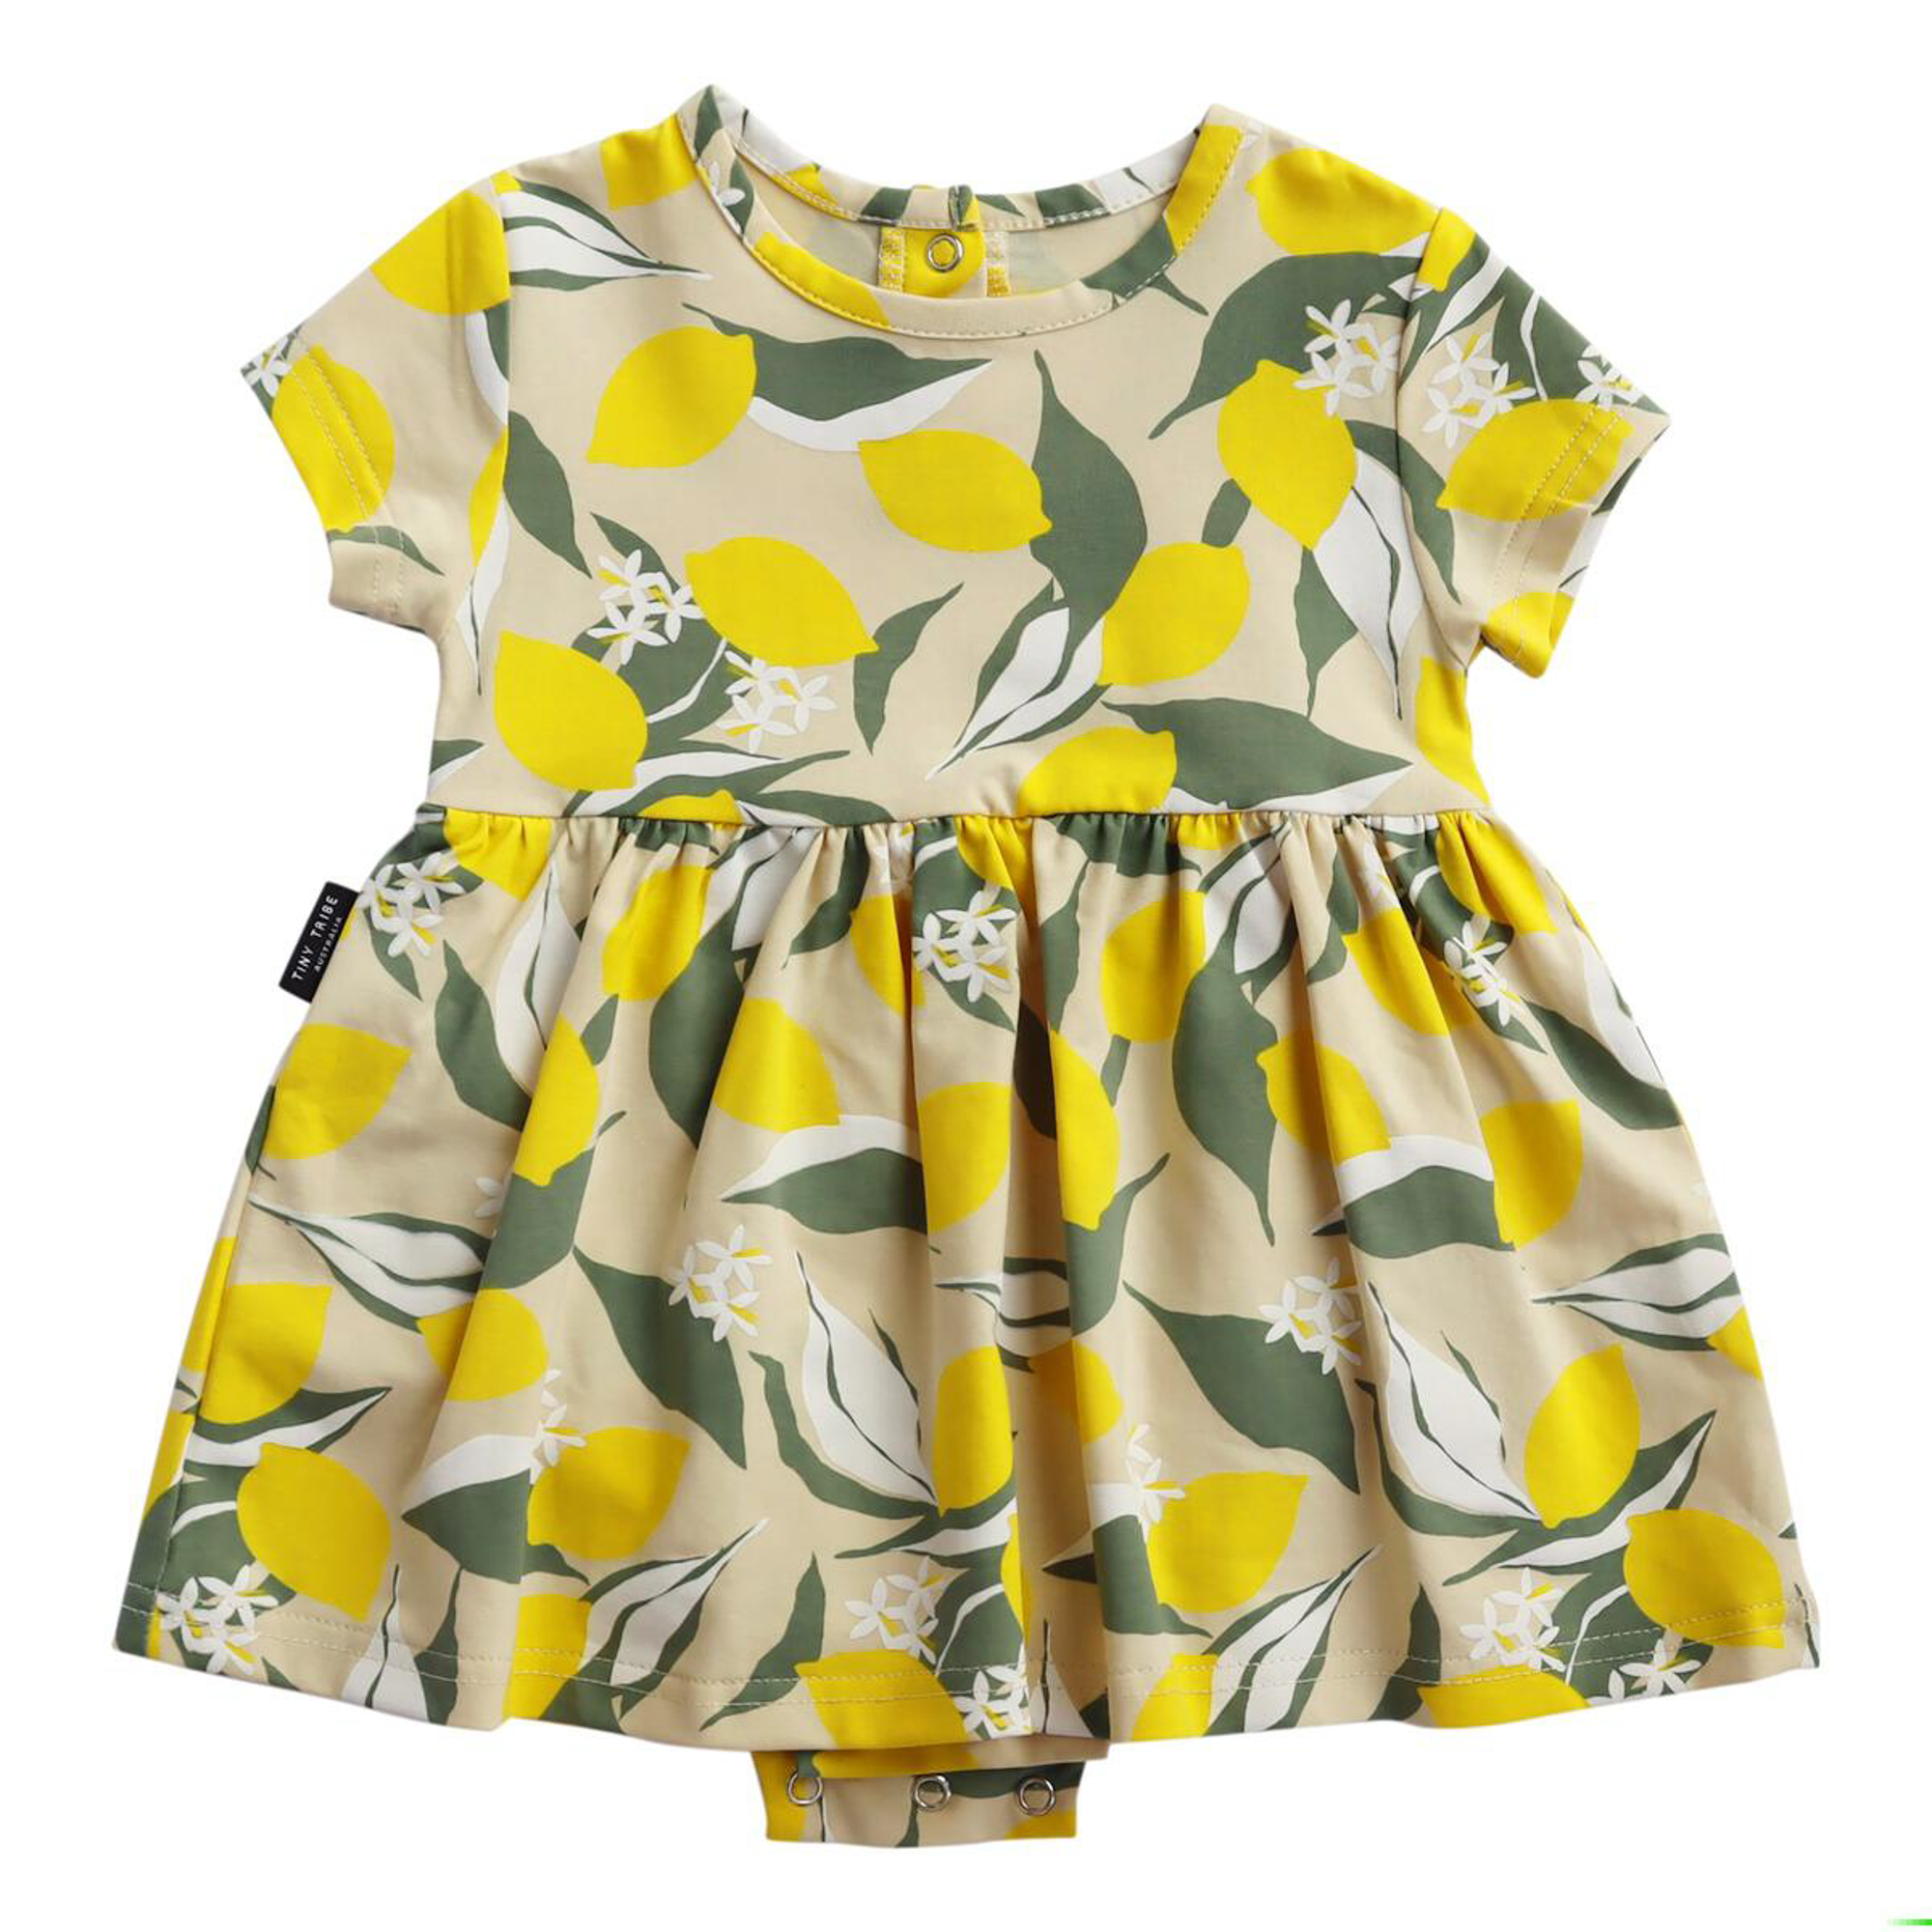 Tiny Girls Solid Dresses - Buy Tiny Girls Solid Dresses online in India